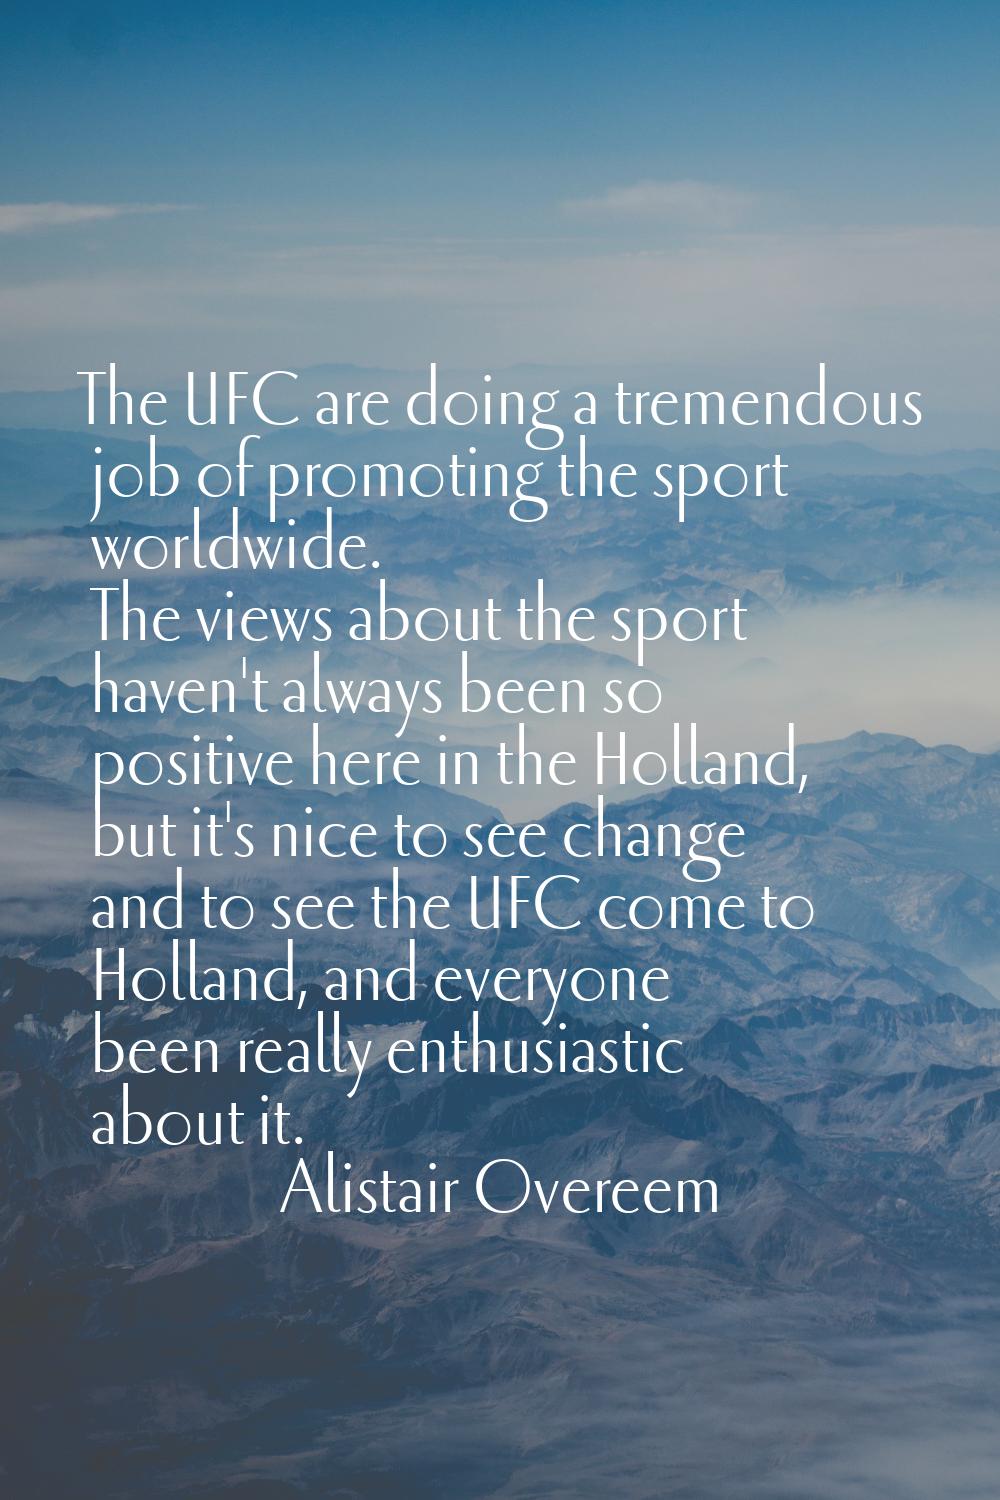 The UFC are doing a tremendous job of promoting the sport worldwide. The views about the sport have